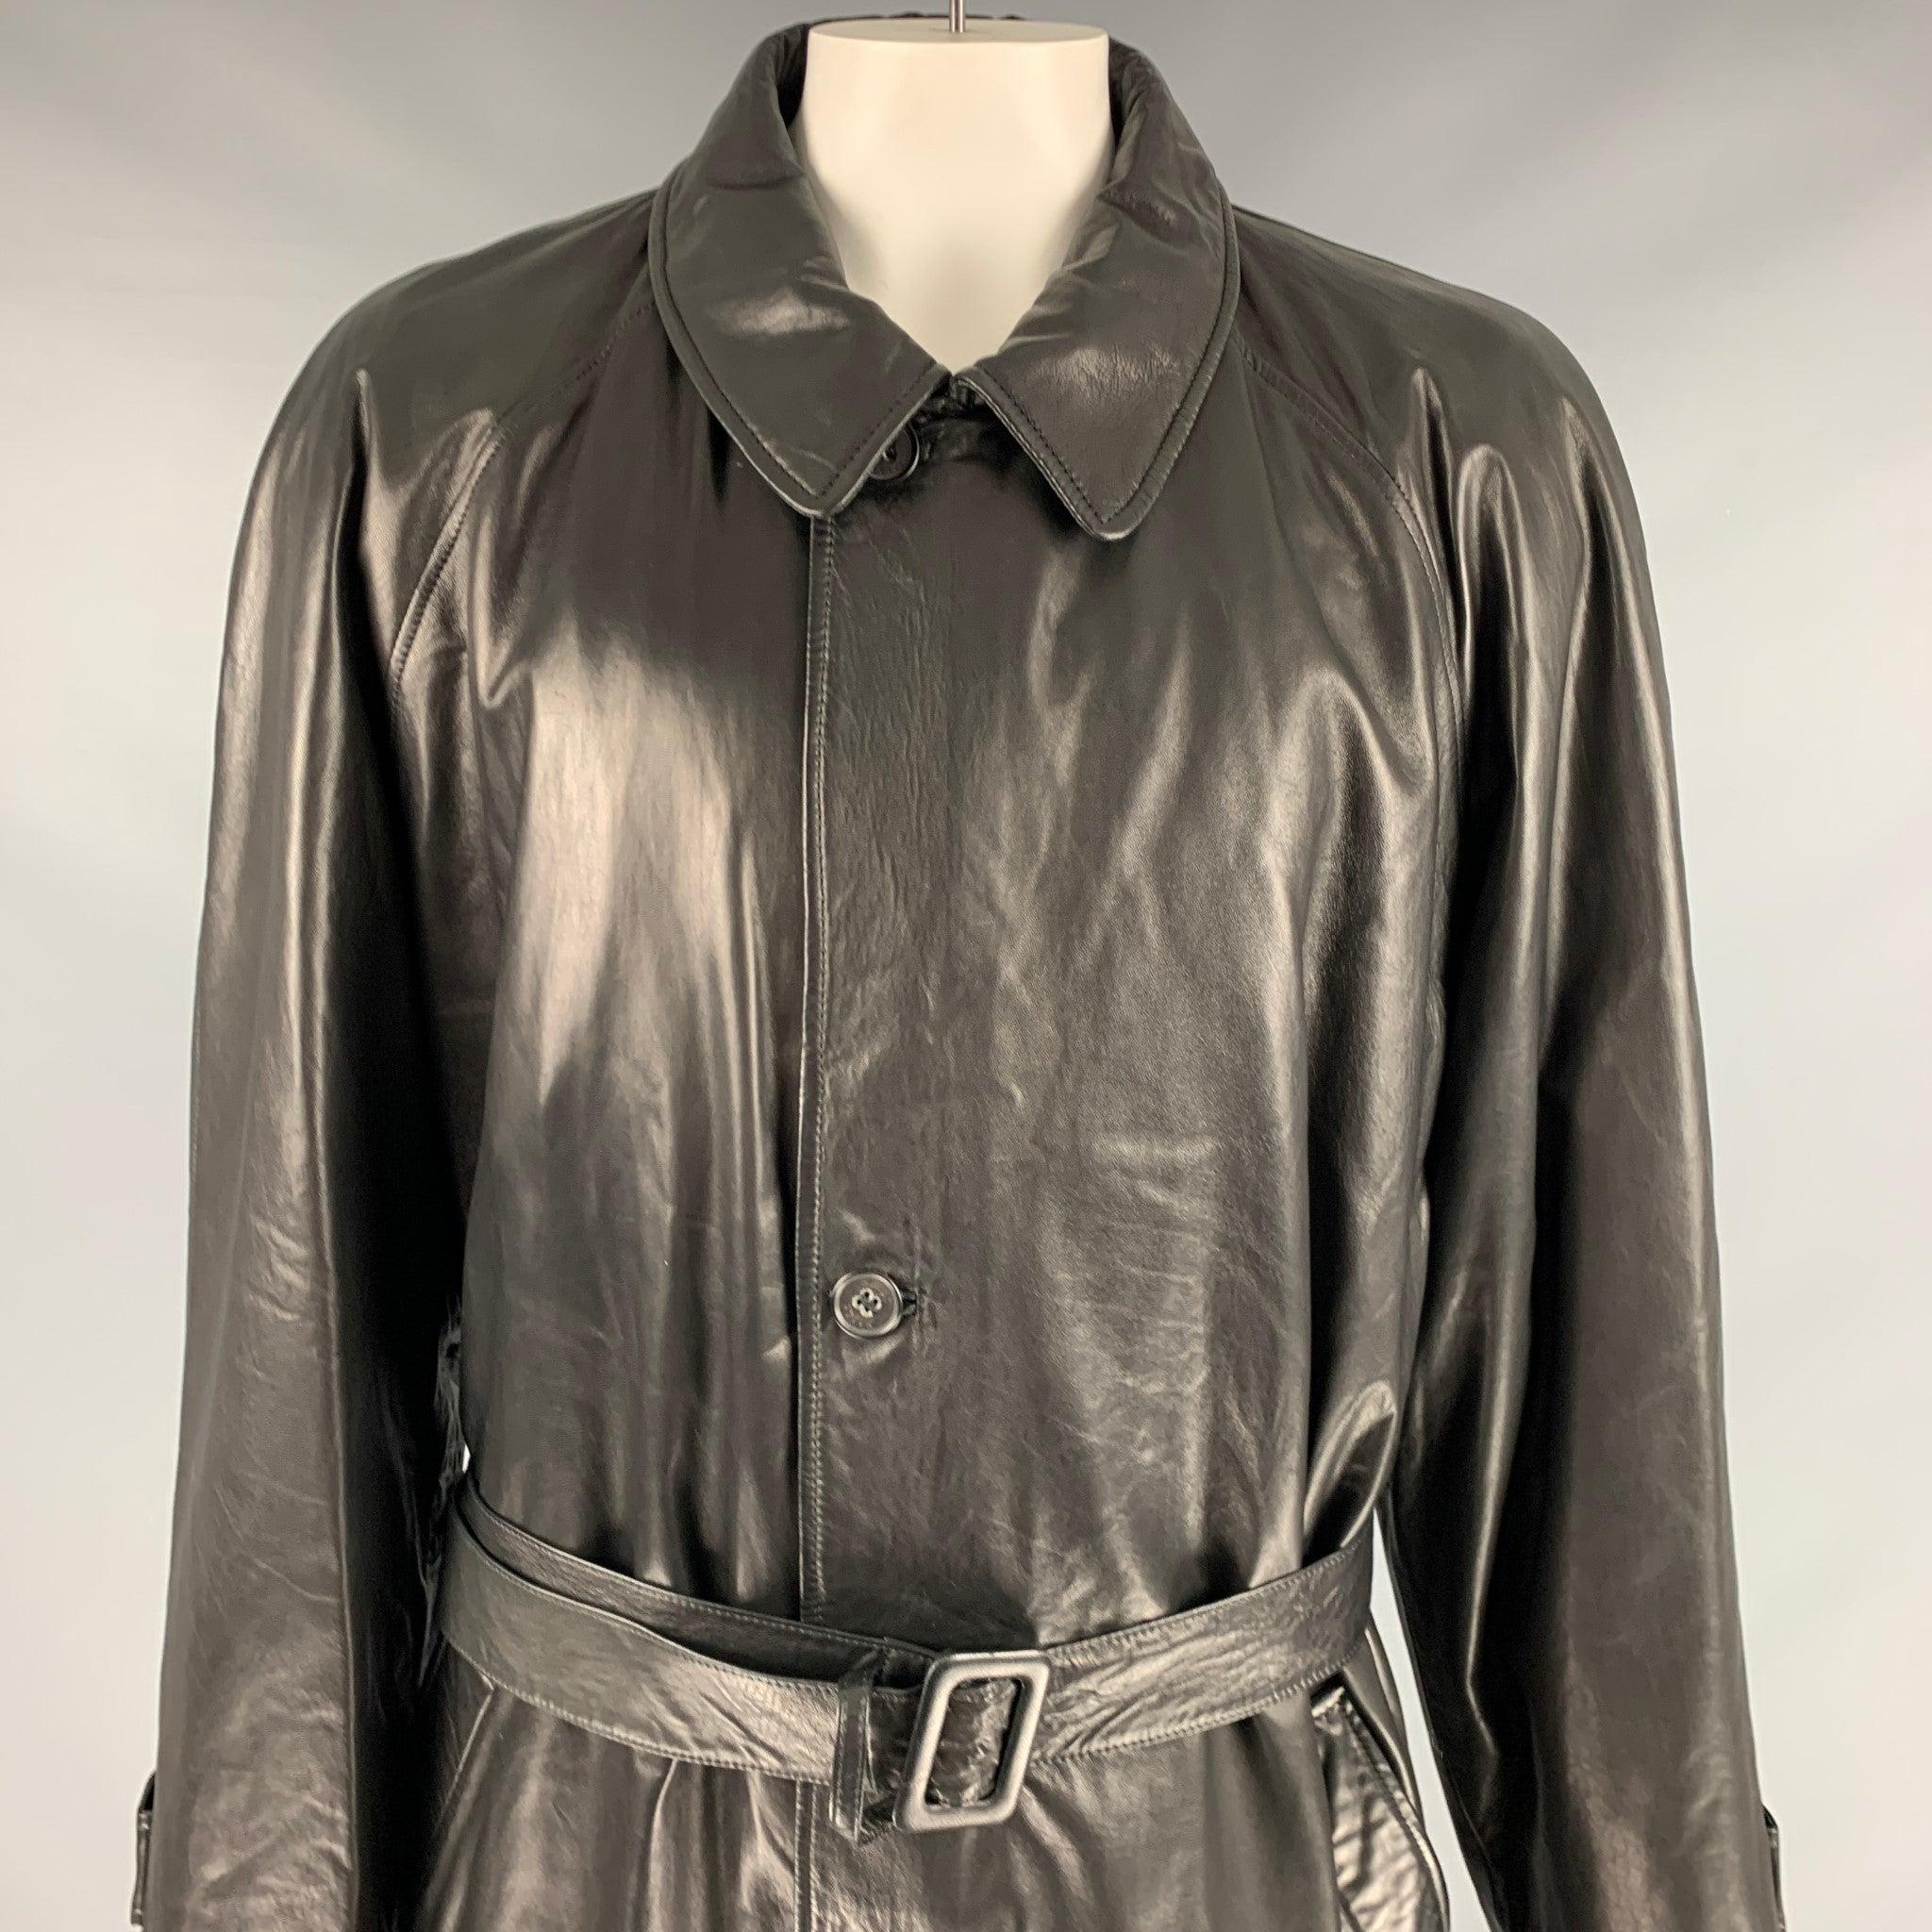 BALLY leather coat
in a
black leather featuring belt, spread collar, and zip and button closure. Made in Italy.Very Good Pre-Owned Condition. Minor signs of wear. 

Marked:   48 

Measurements: 
 
Shoulder: 17 inches Chest: 48 inches Sleeve: 28.5